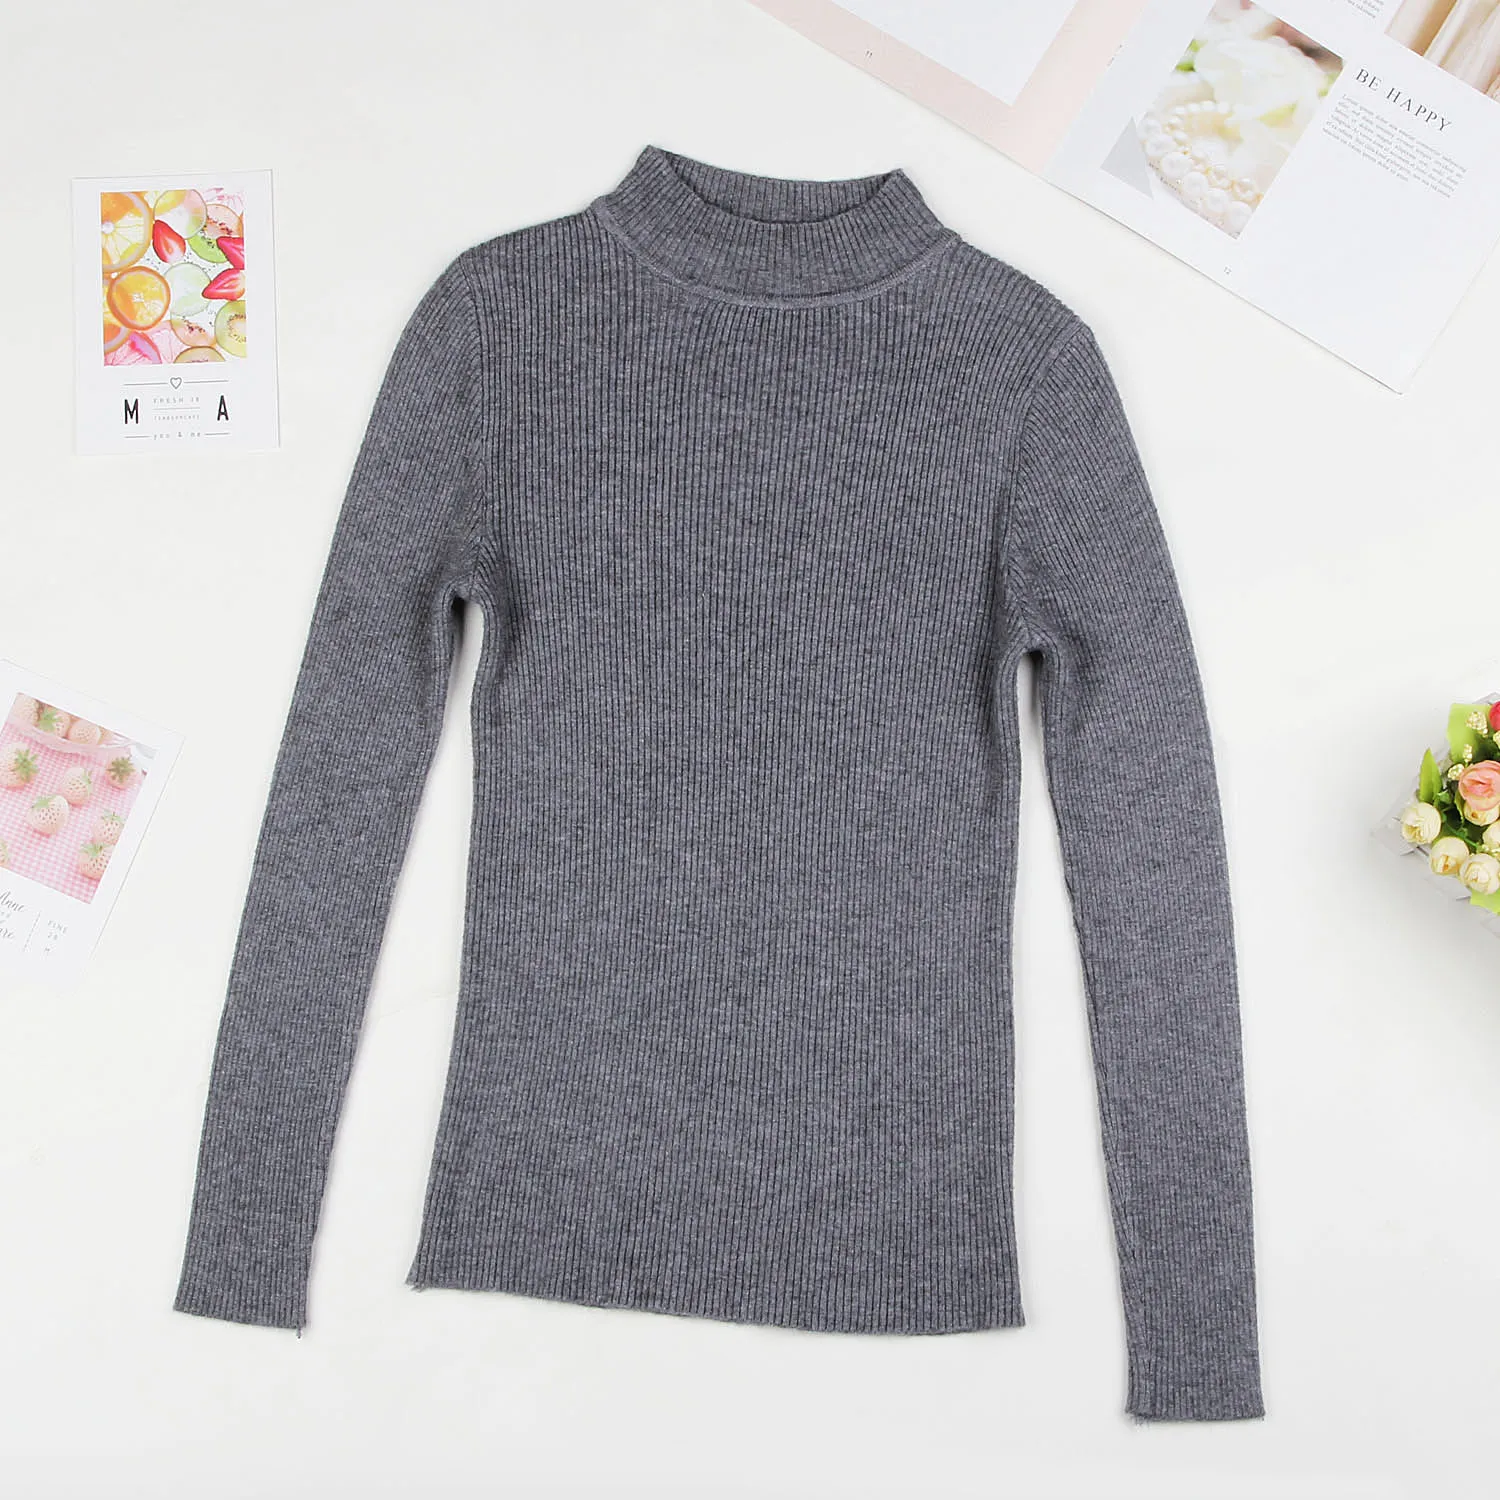 DeRuiLaDy Fall New Women Turtleneck Sweater Pullover Black Pink Knitted Slim Sweaters Tops Winter Casual Sweater Jumper Top